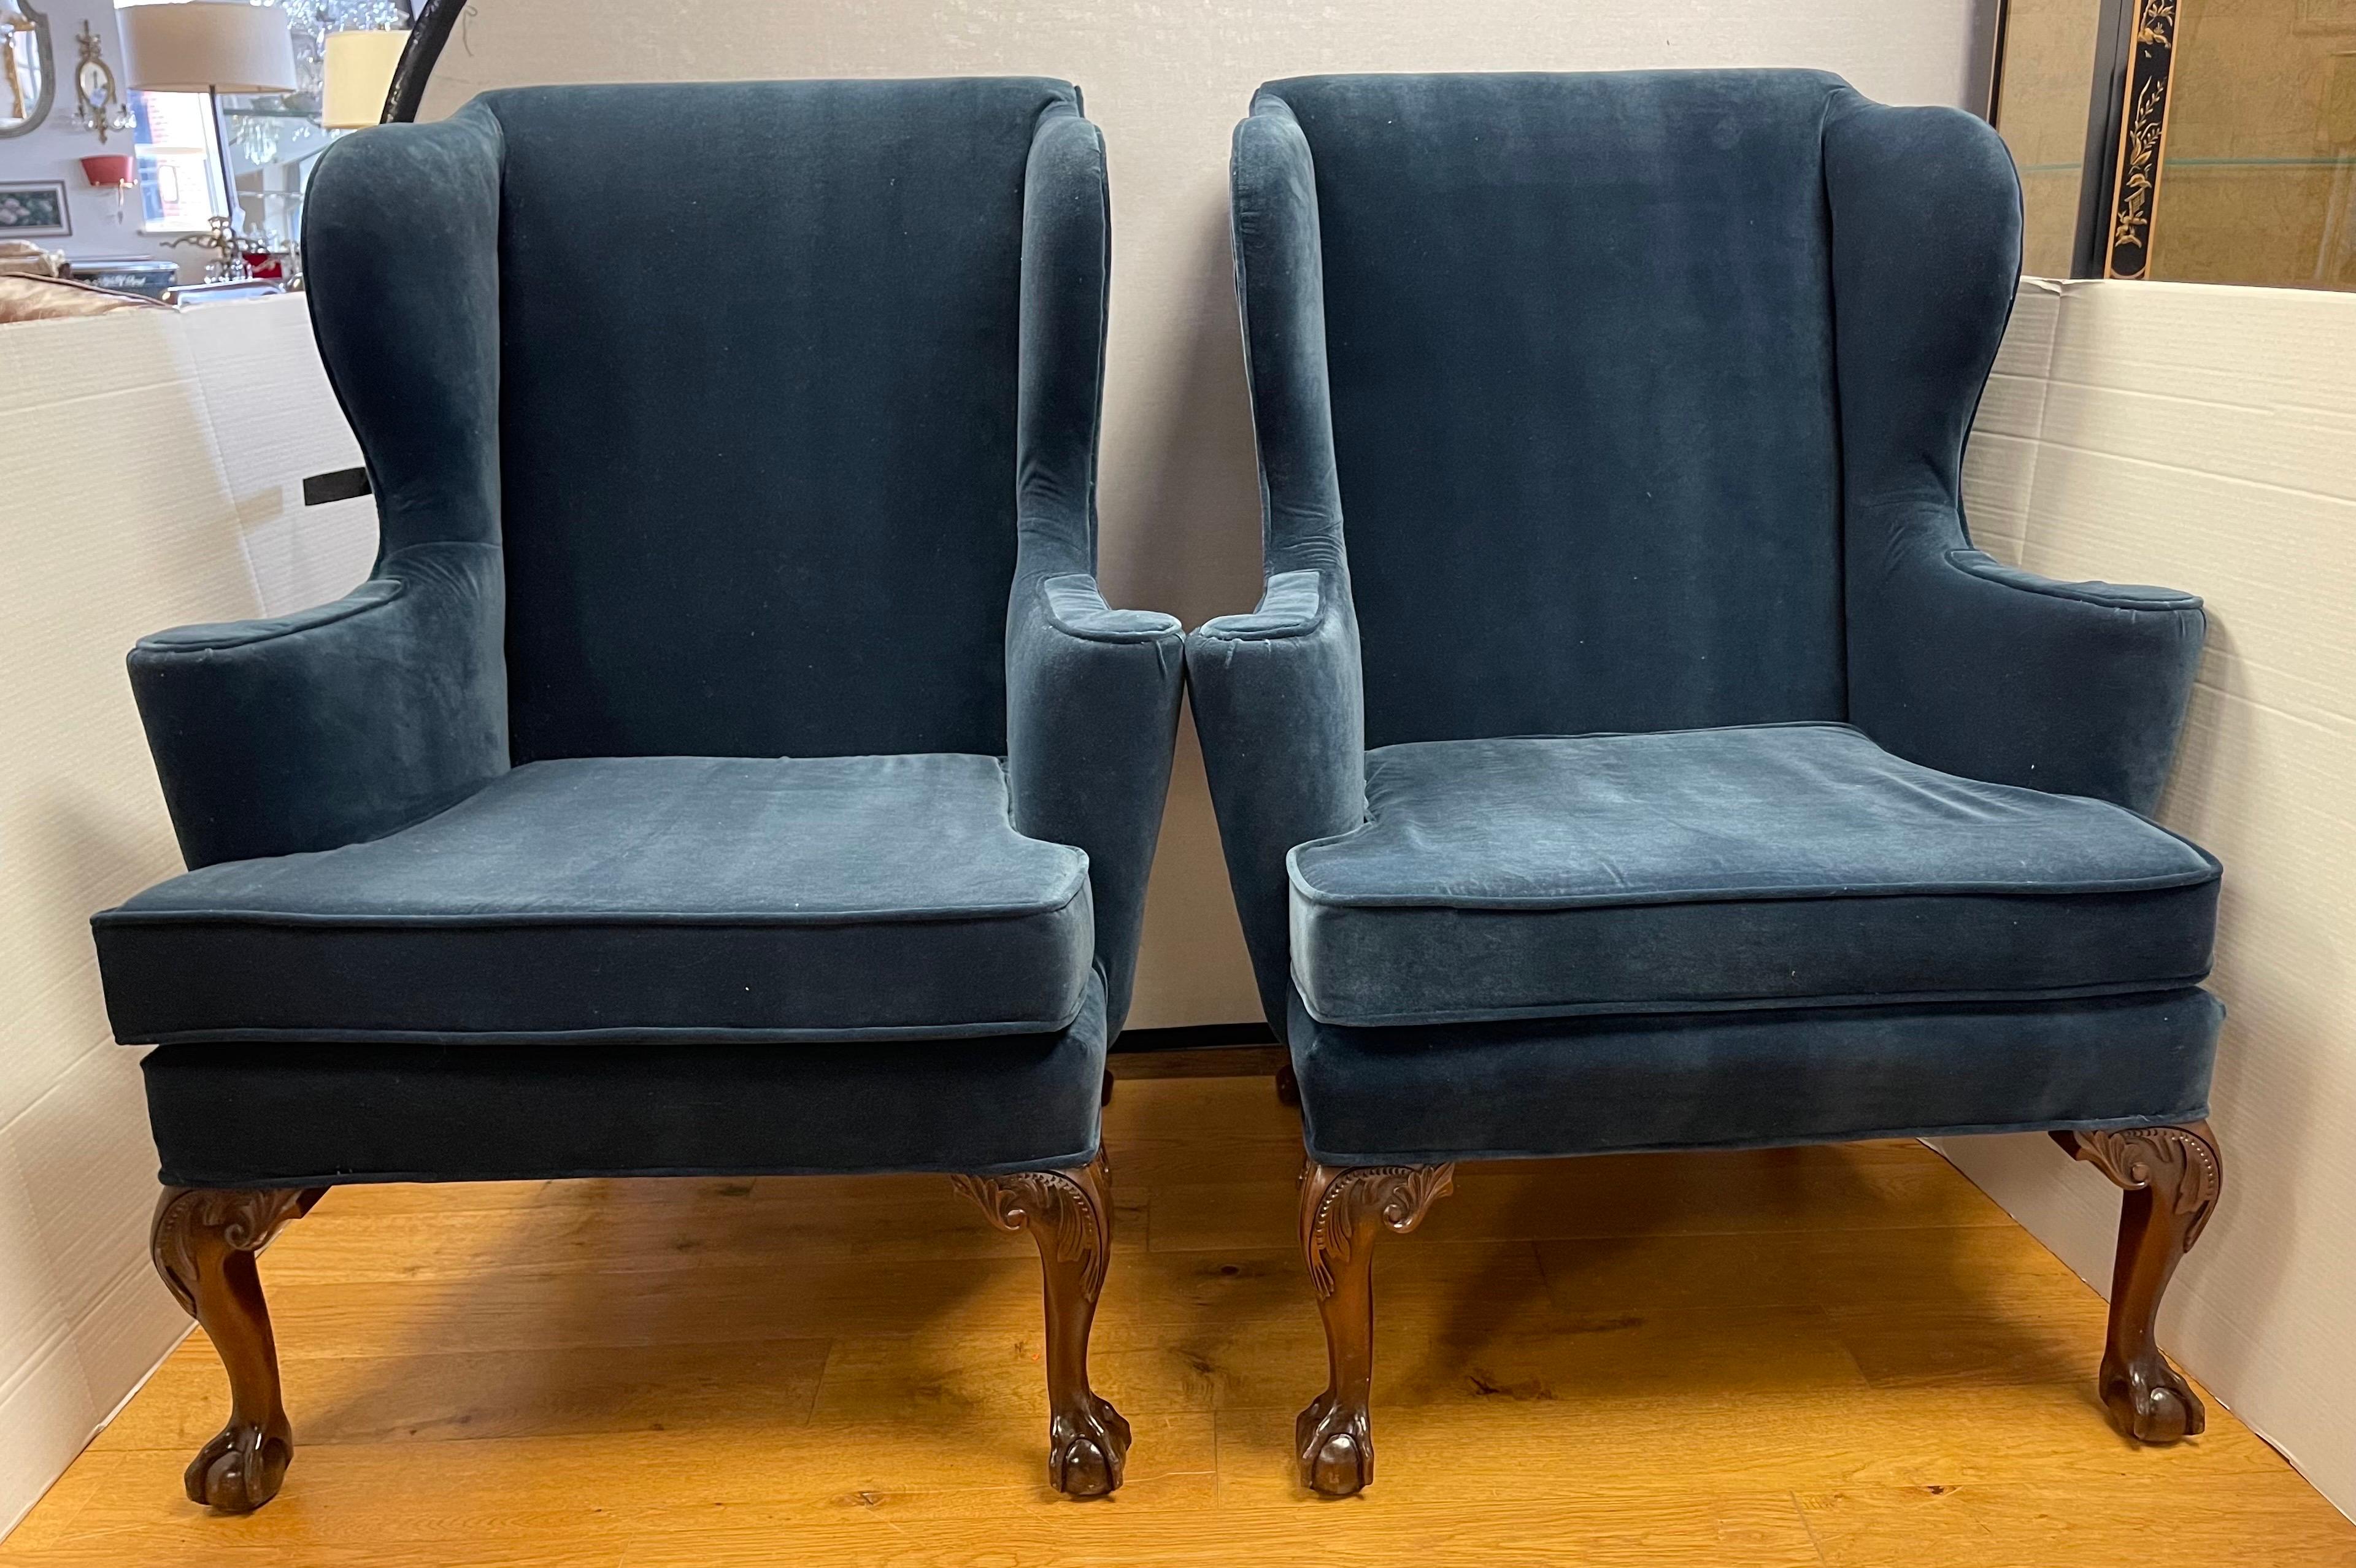 A gorgeous pair of matching Kittinger Georgian wingback chairs with newly upholstered navy blue Donghia fabric. The chairs sit on intricately carved mahogany ball and claw feet. Nothing short of magnificent. All fabric and padding textile have been